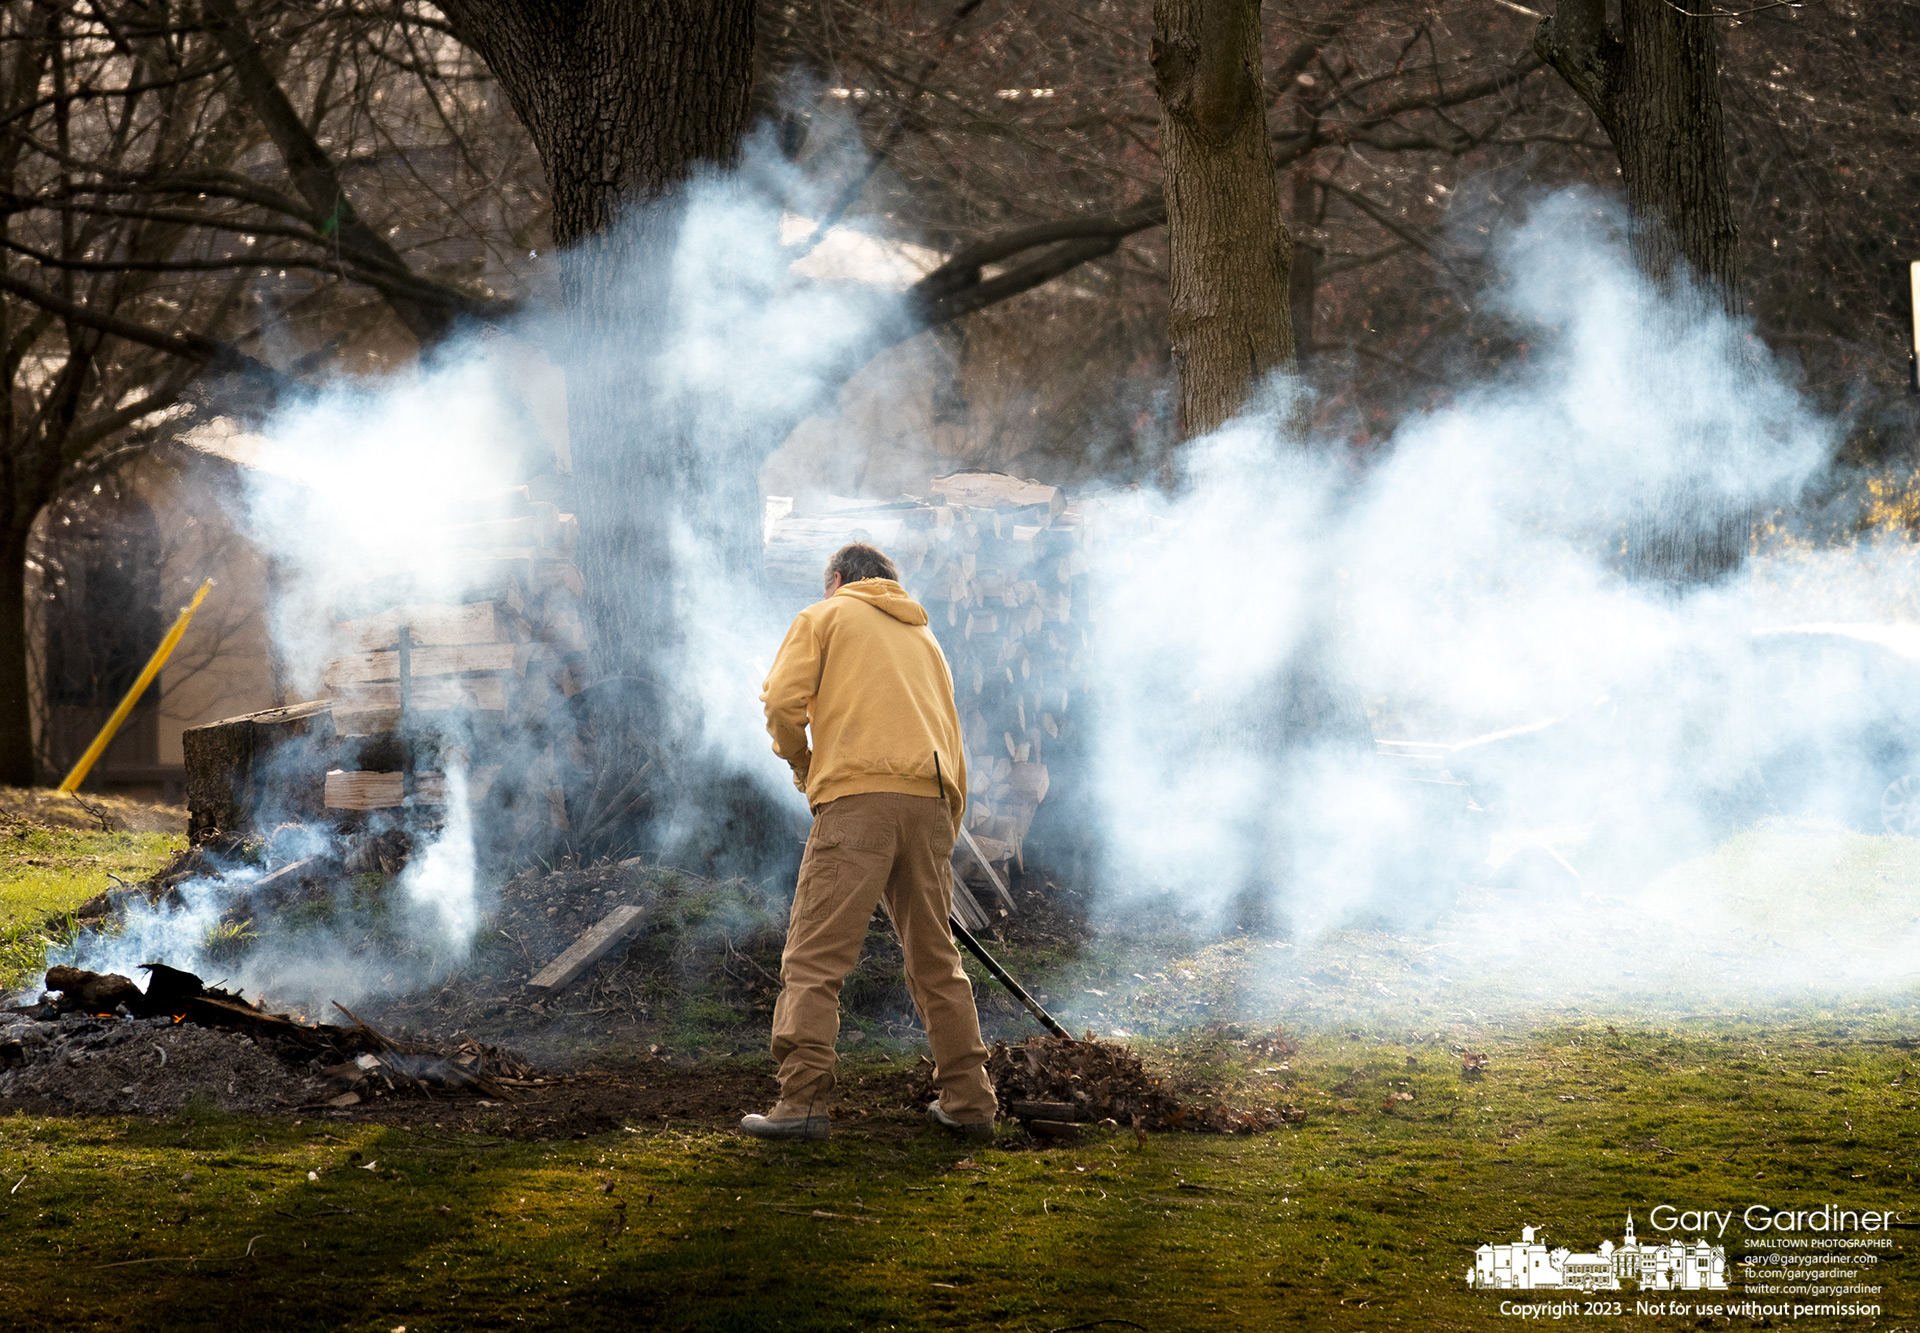 A man rakes leaves and debris from a fallen tree into a burning pile in the backyard of his home that borders Hoover Reservoir. My final Photo for March 21, 2023.